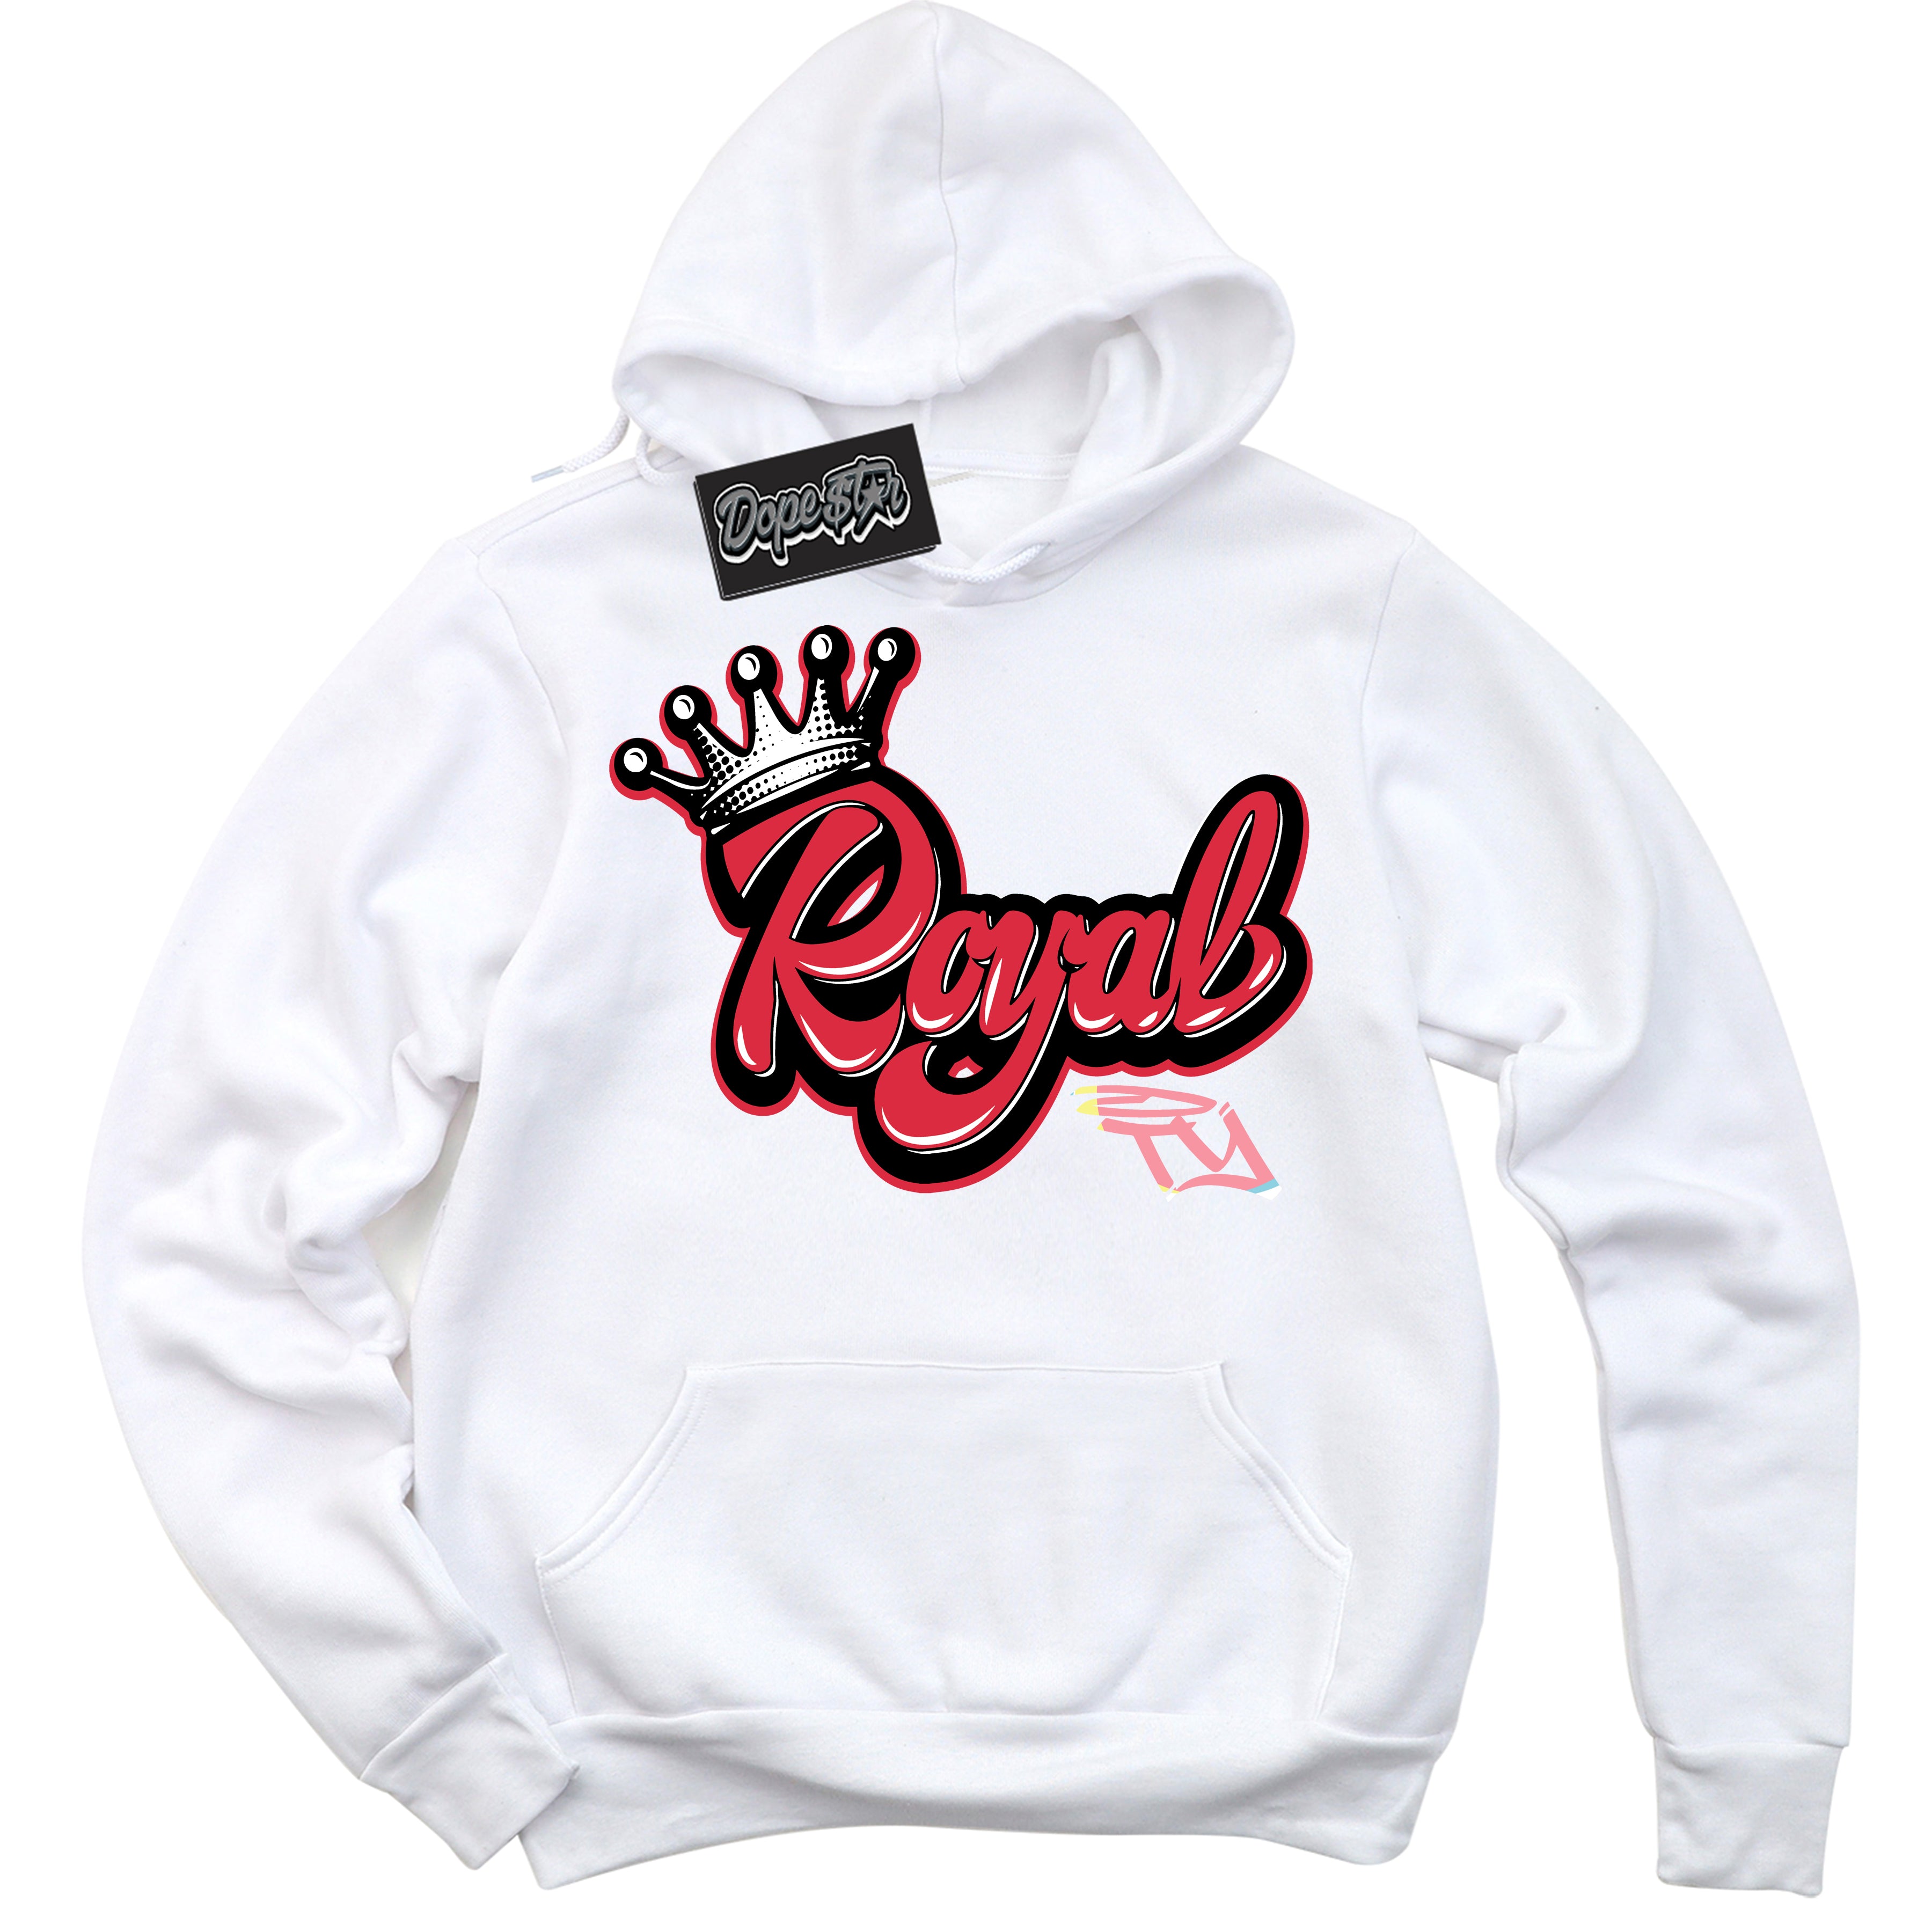 Cool White Graphic DopeStar Hoodie with “ Royalty “ print, that perfectly matches Spider-Verse 1s sneakers